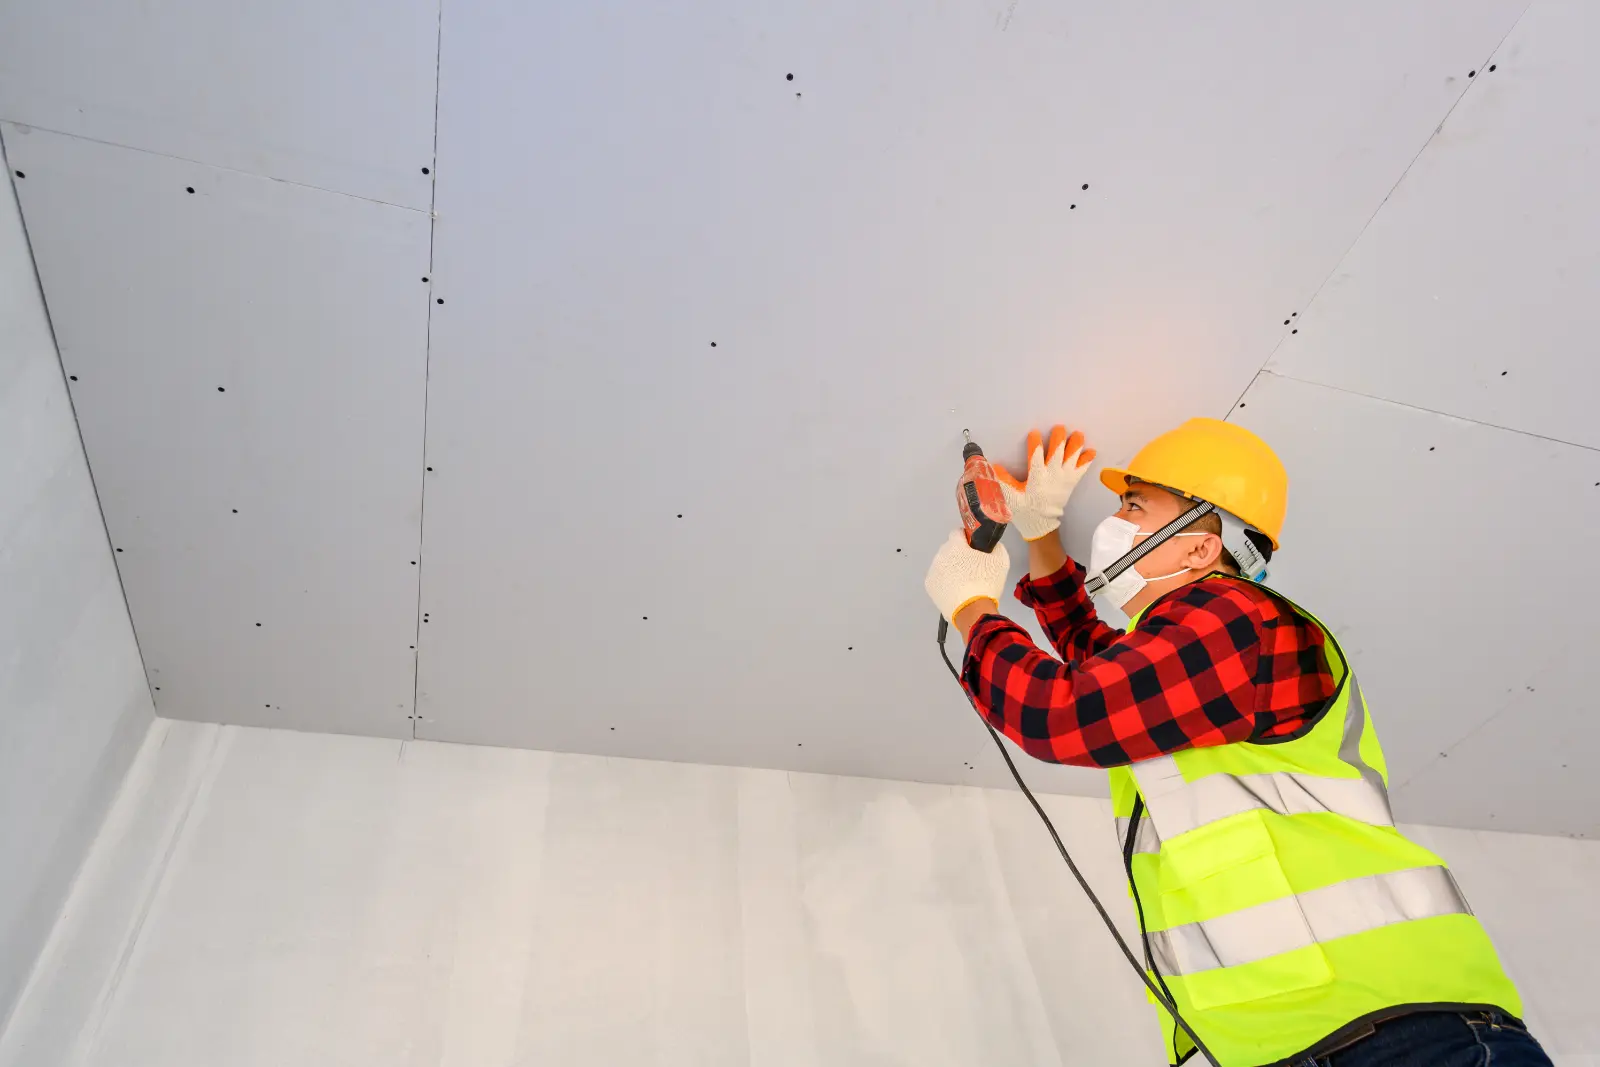 Plasterboard Repair. Drill home ceiling Construction workers assemble the ceiling with drywall